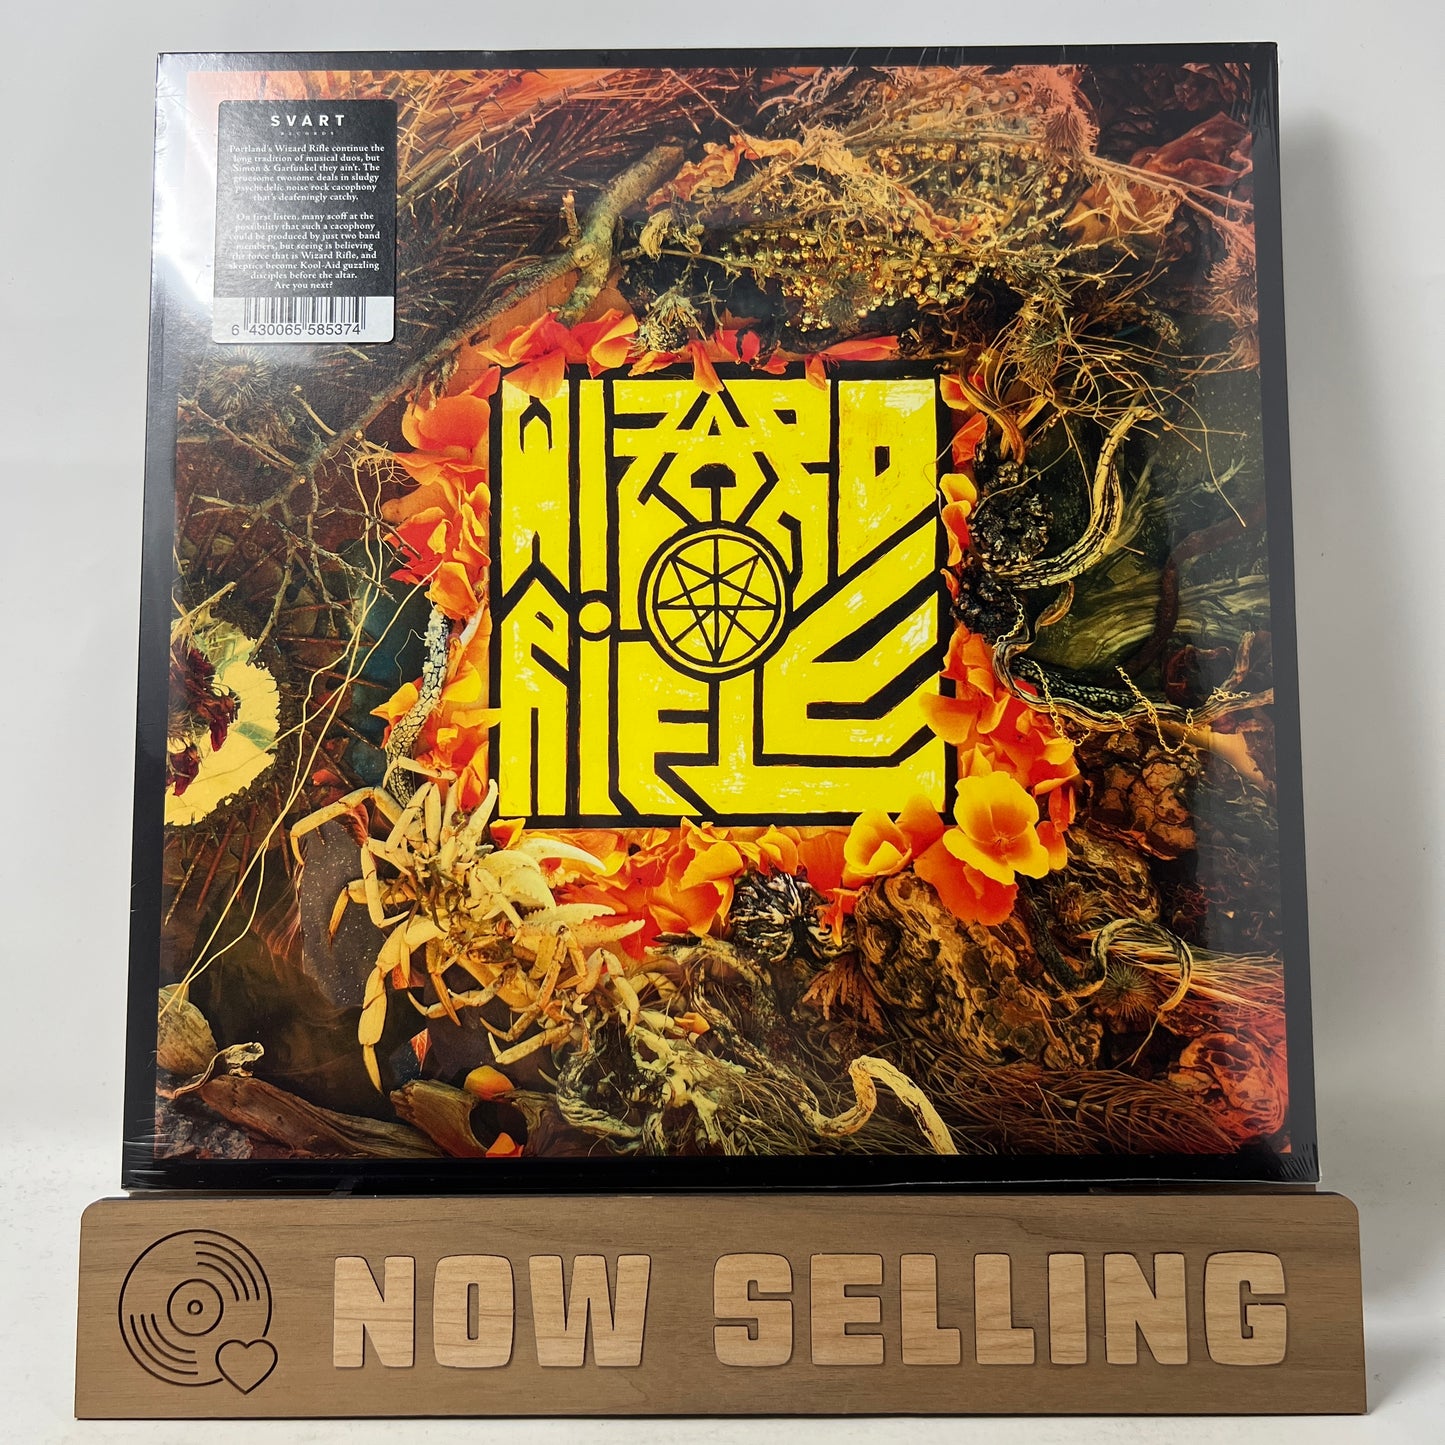 Wizard Rifle Self Titled Vinyl 12" SEALED